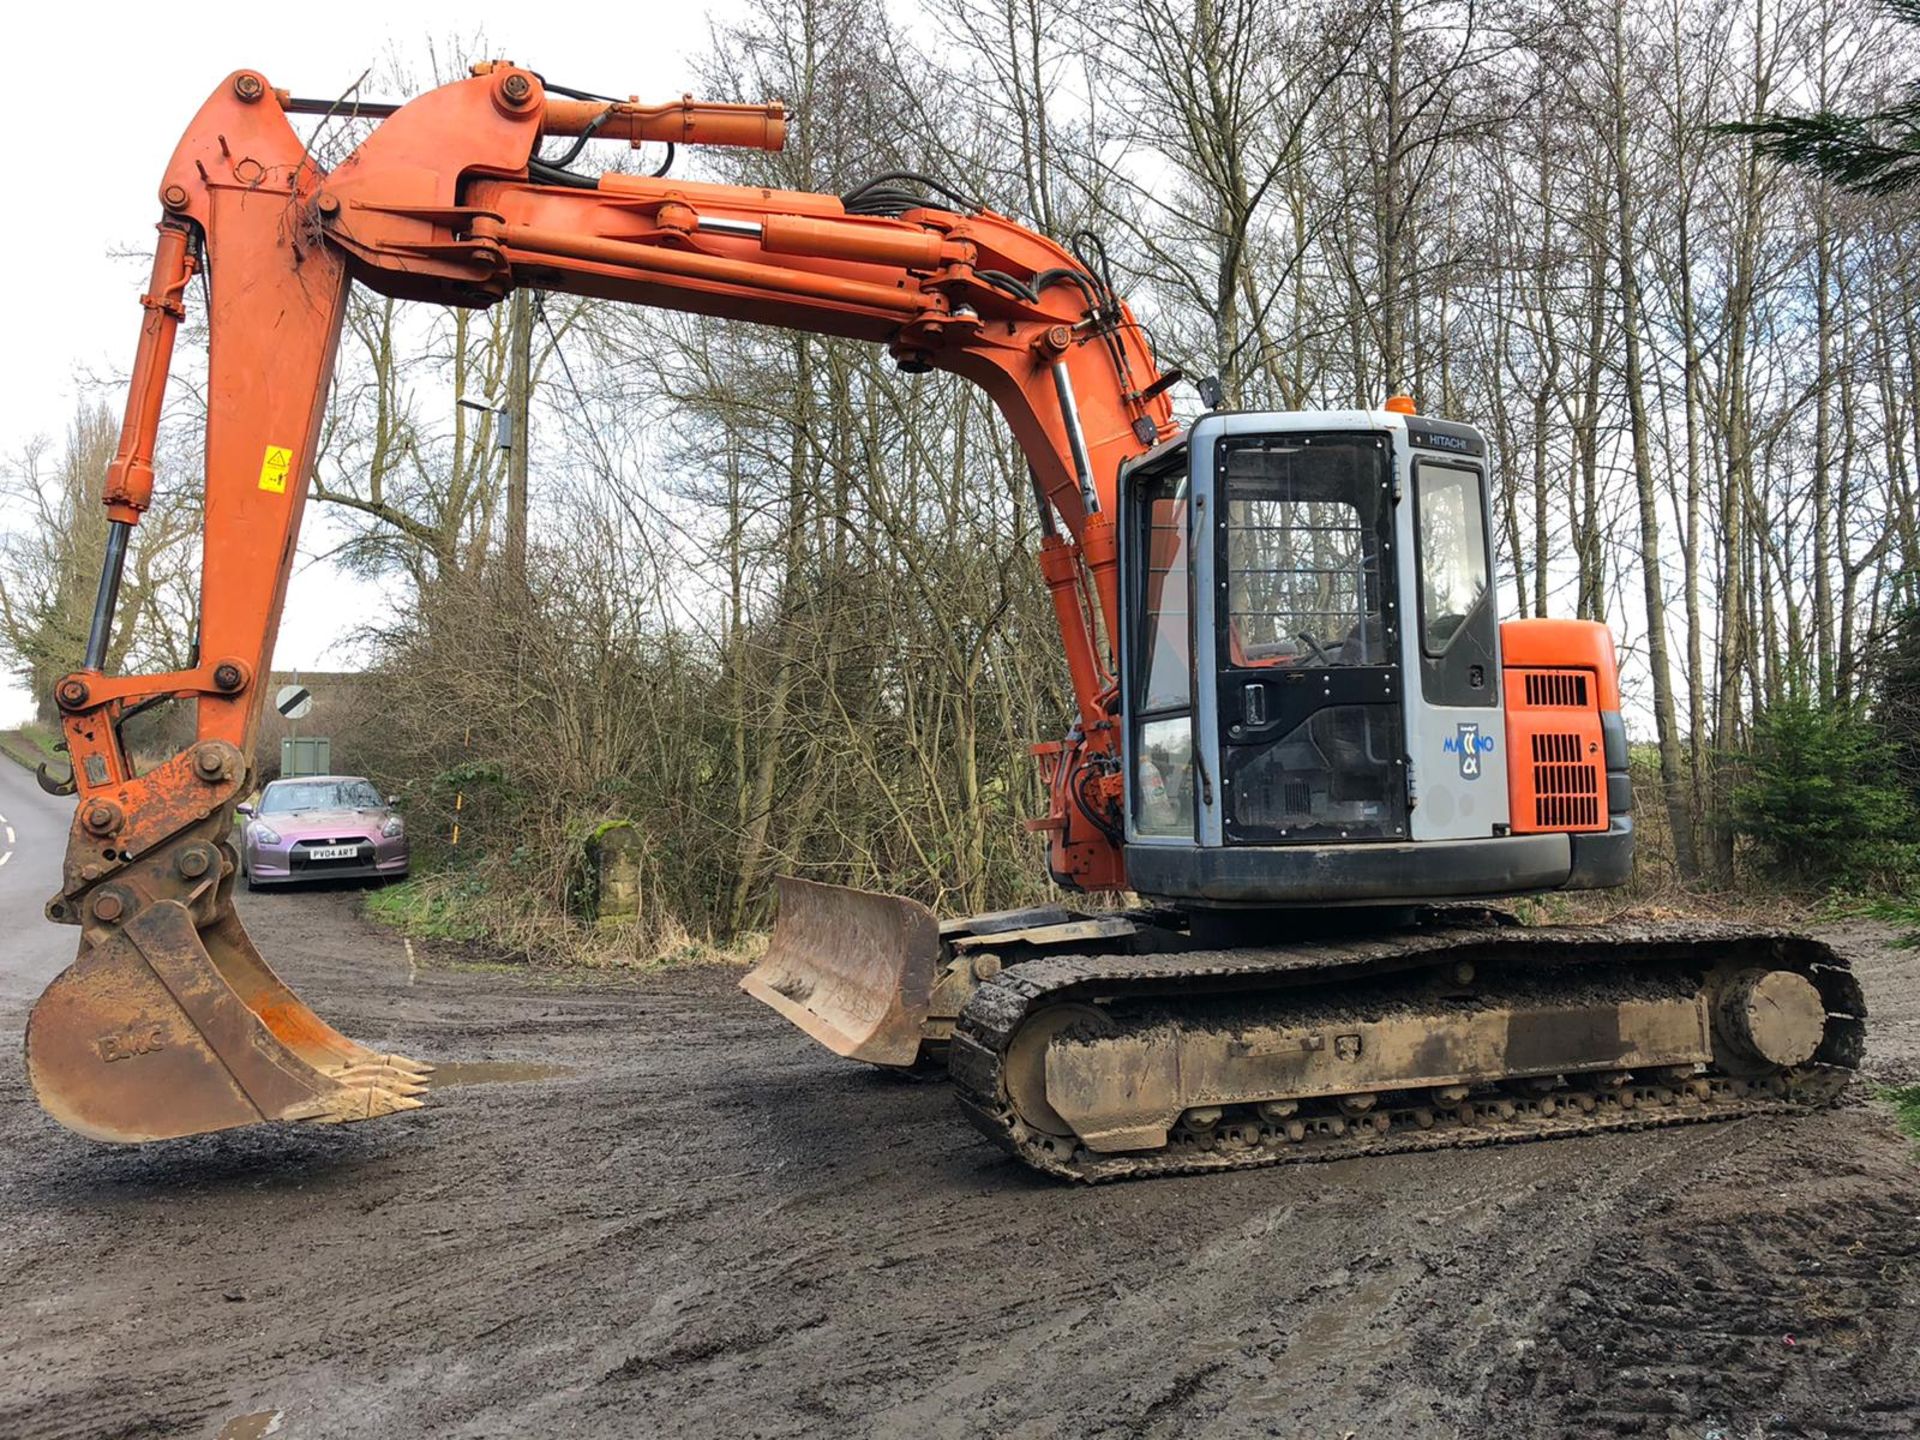 HITACHI EX135UR 13 TON TRACKED DIGGER / EXCAVATOR, RUNS, WORKS AND DIGS, SHOWING 6900 HOURS